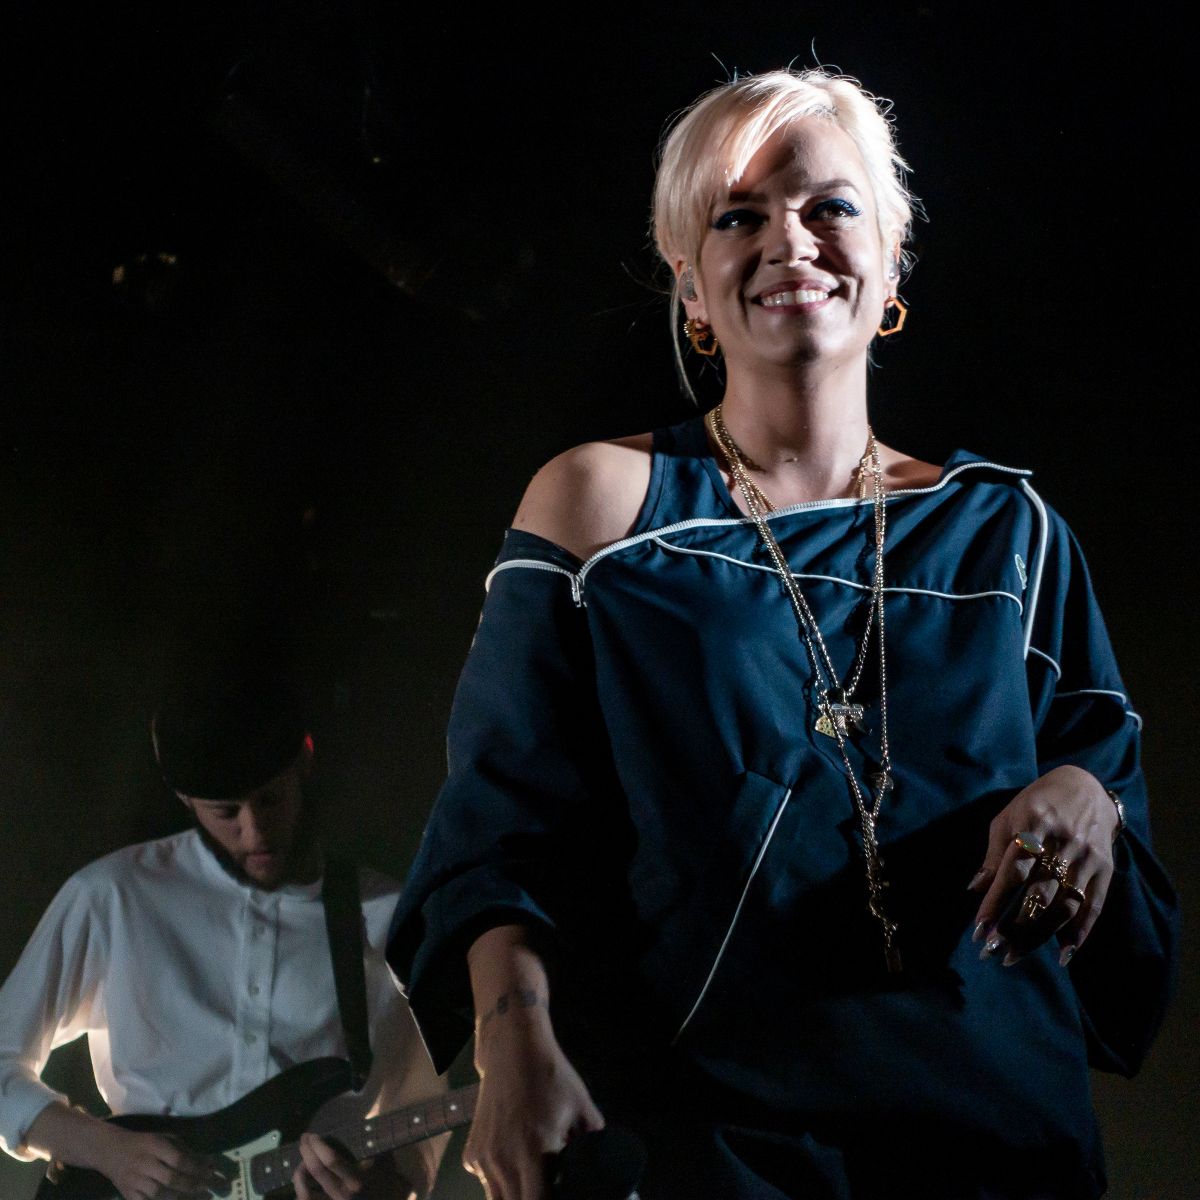 My Thoughts Exactly – The feminist icon and legend that is Lily Allen